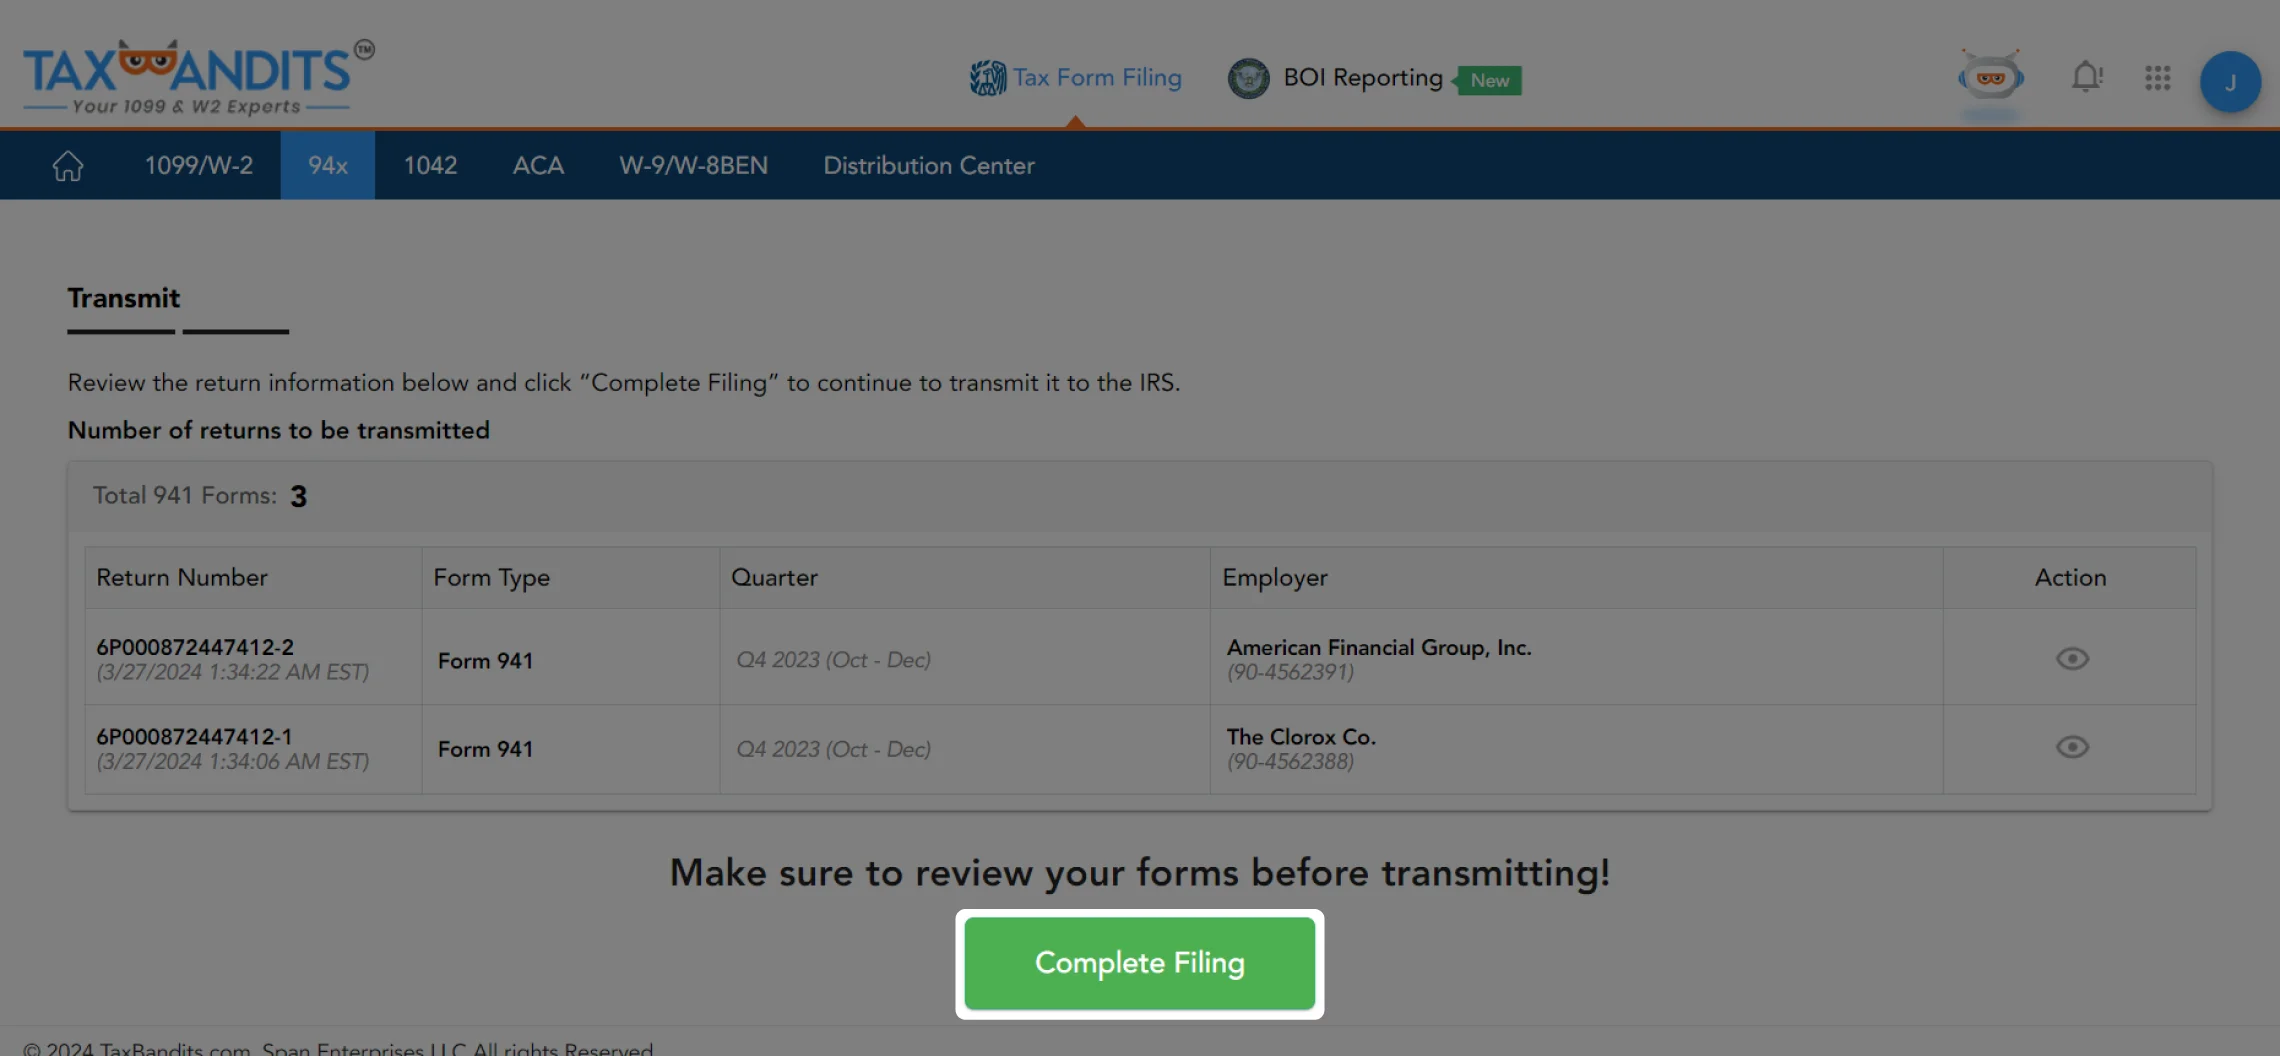 Review Form summary and click Continue